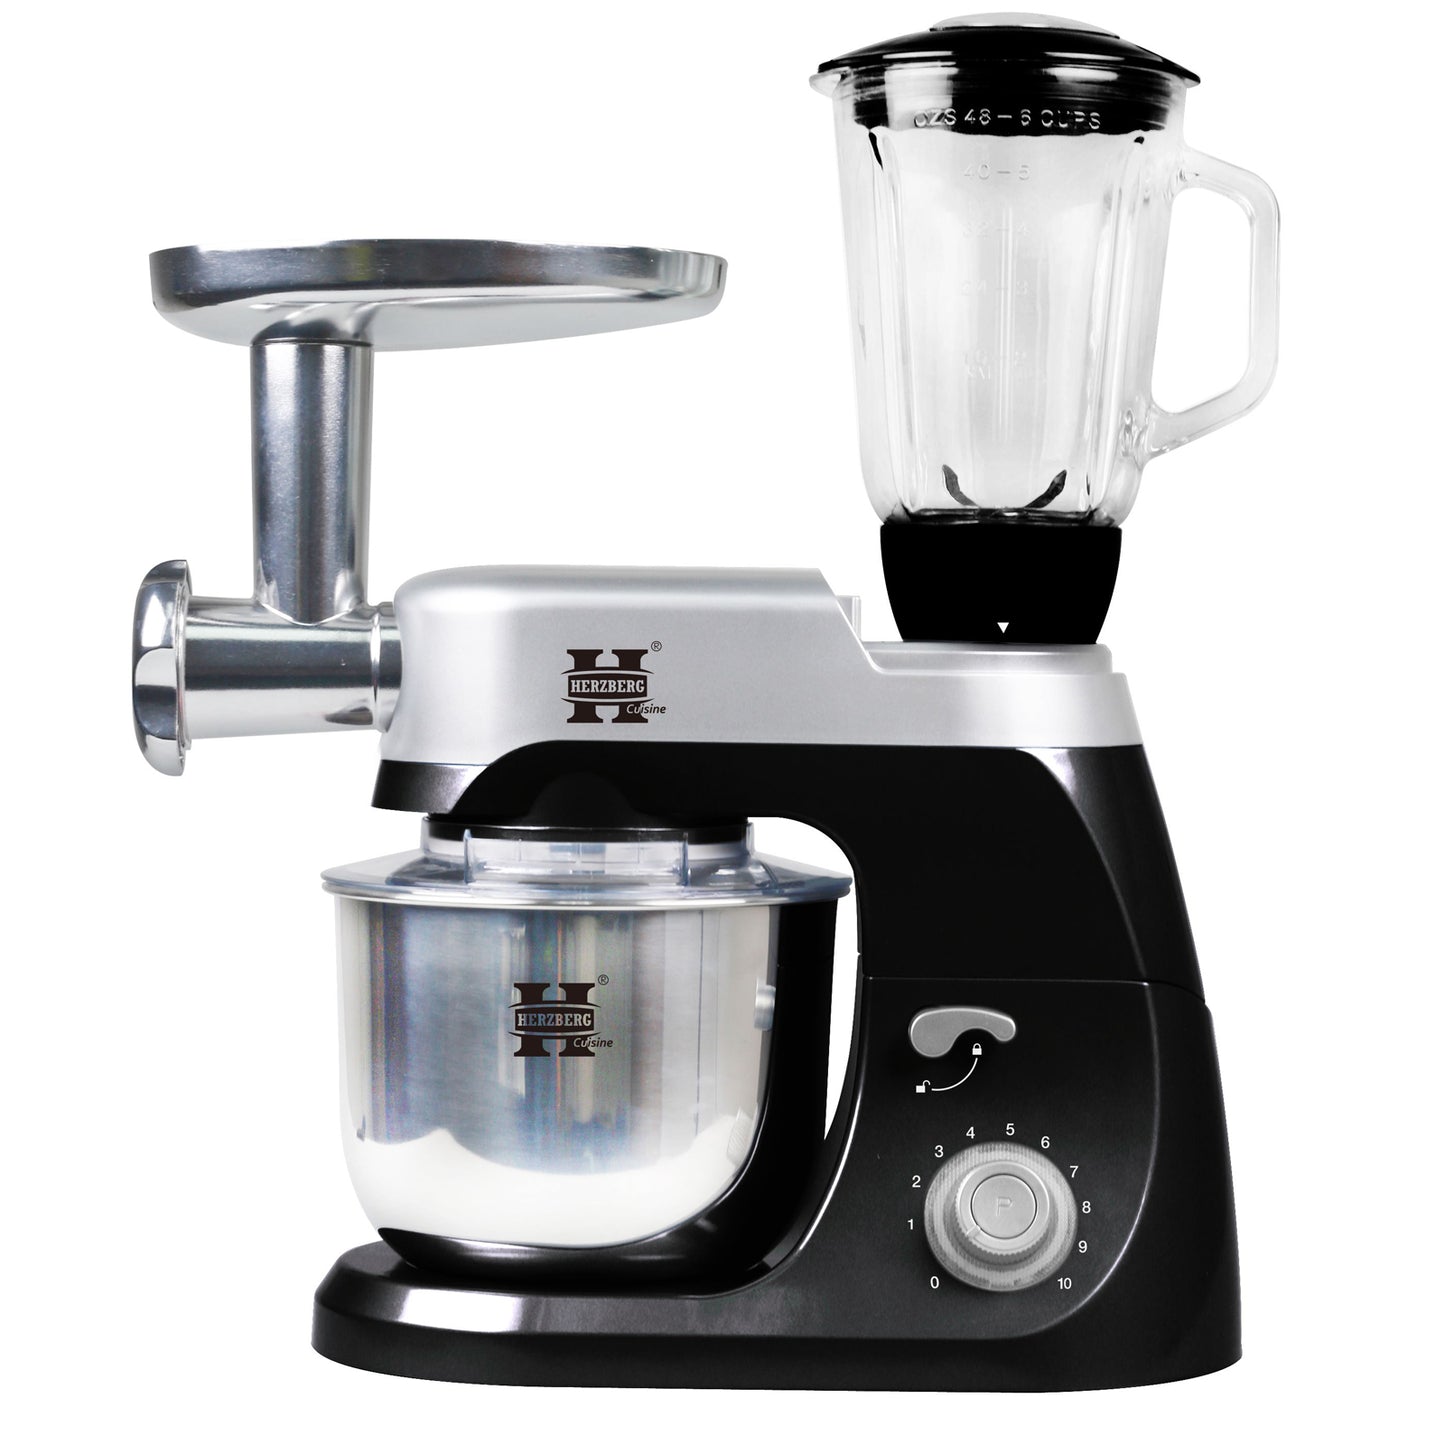 Herzberg HG-5029:3 in 1  800W Stand Mixer With Planetary Beating Action Black